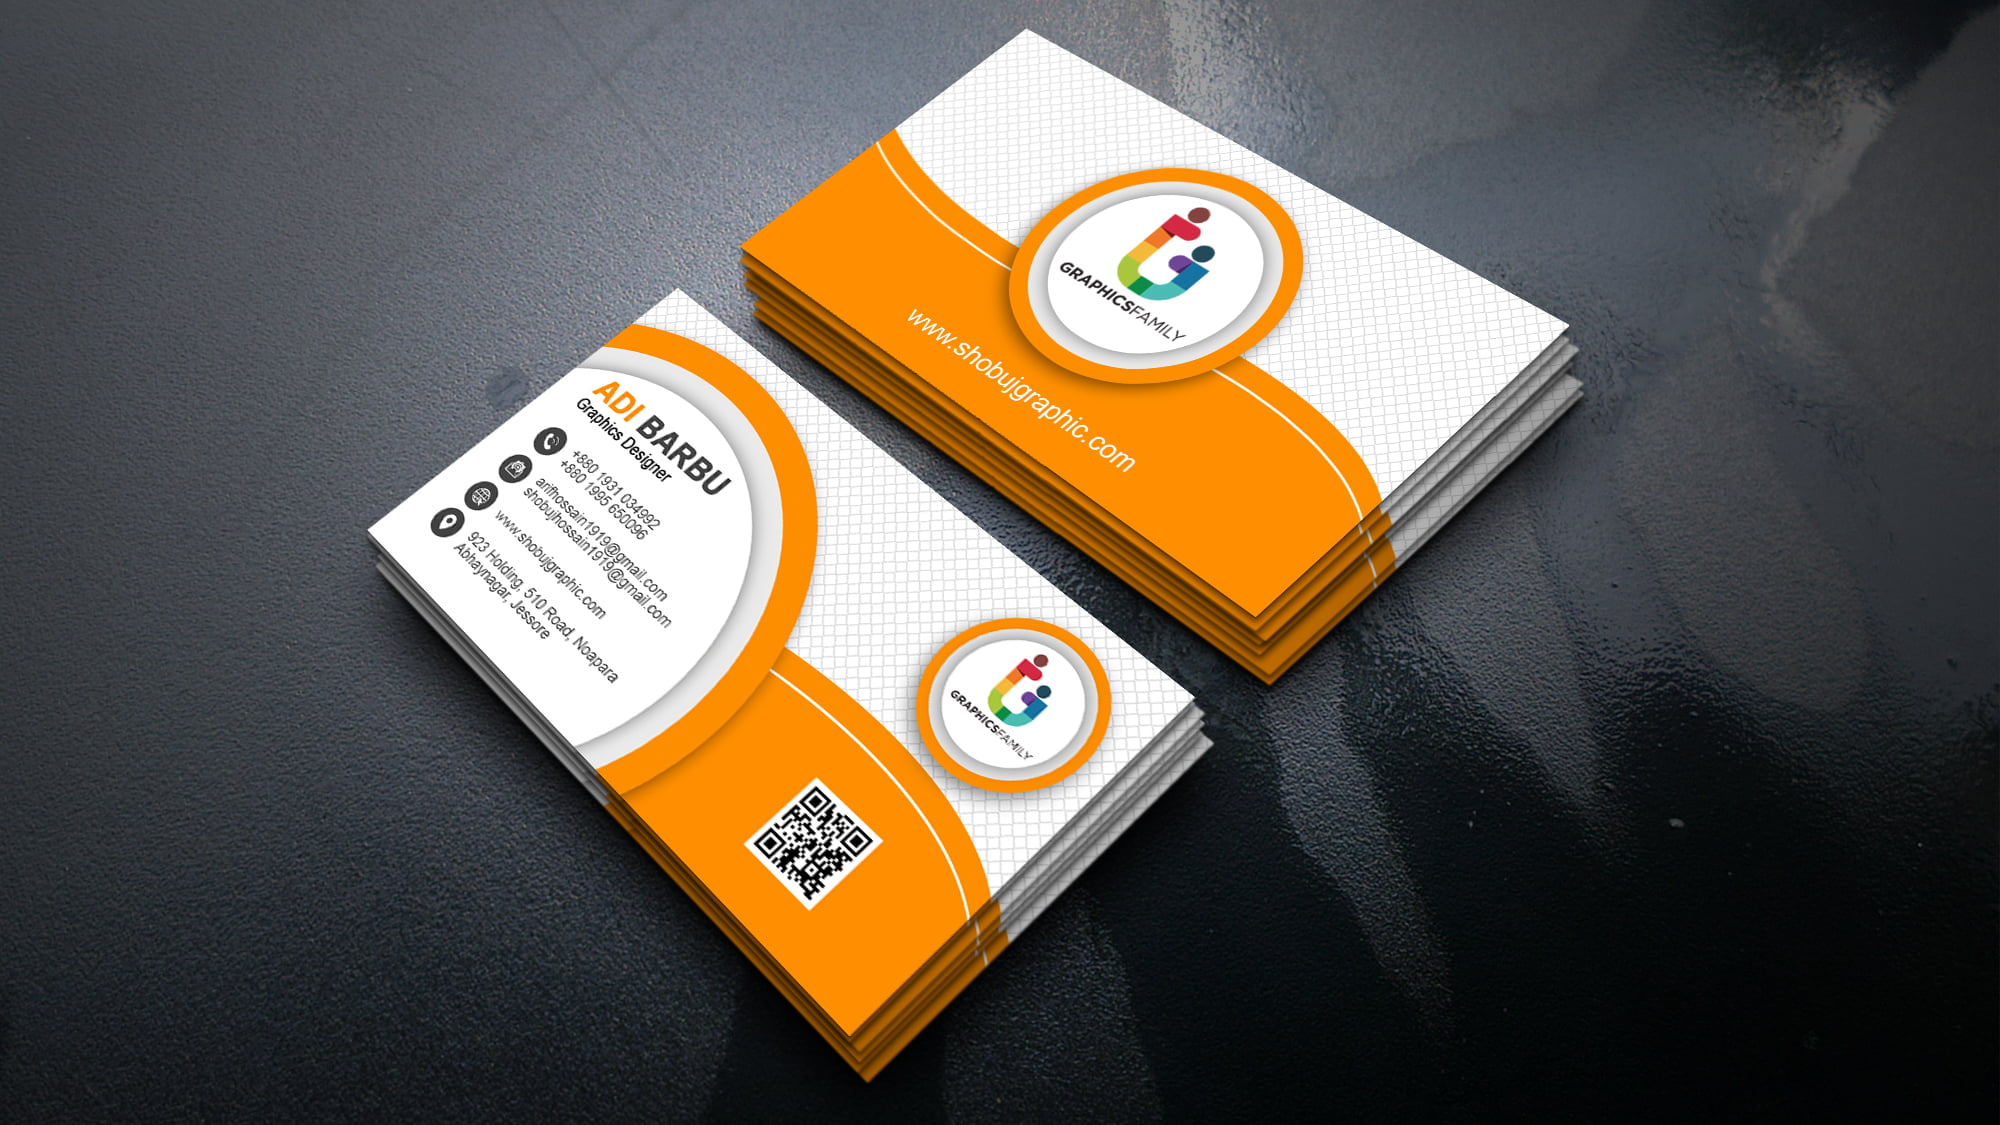 What Are The Key Elements of a Successful Business Card?